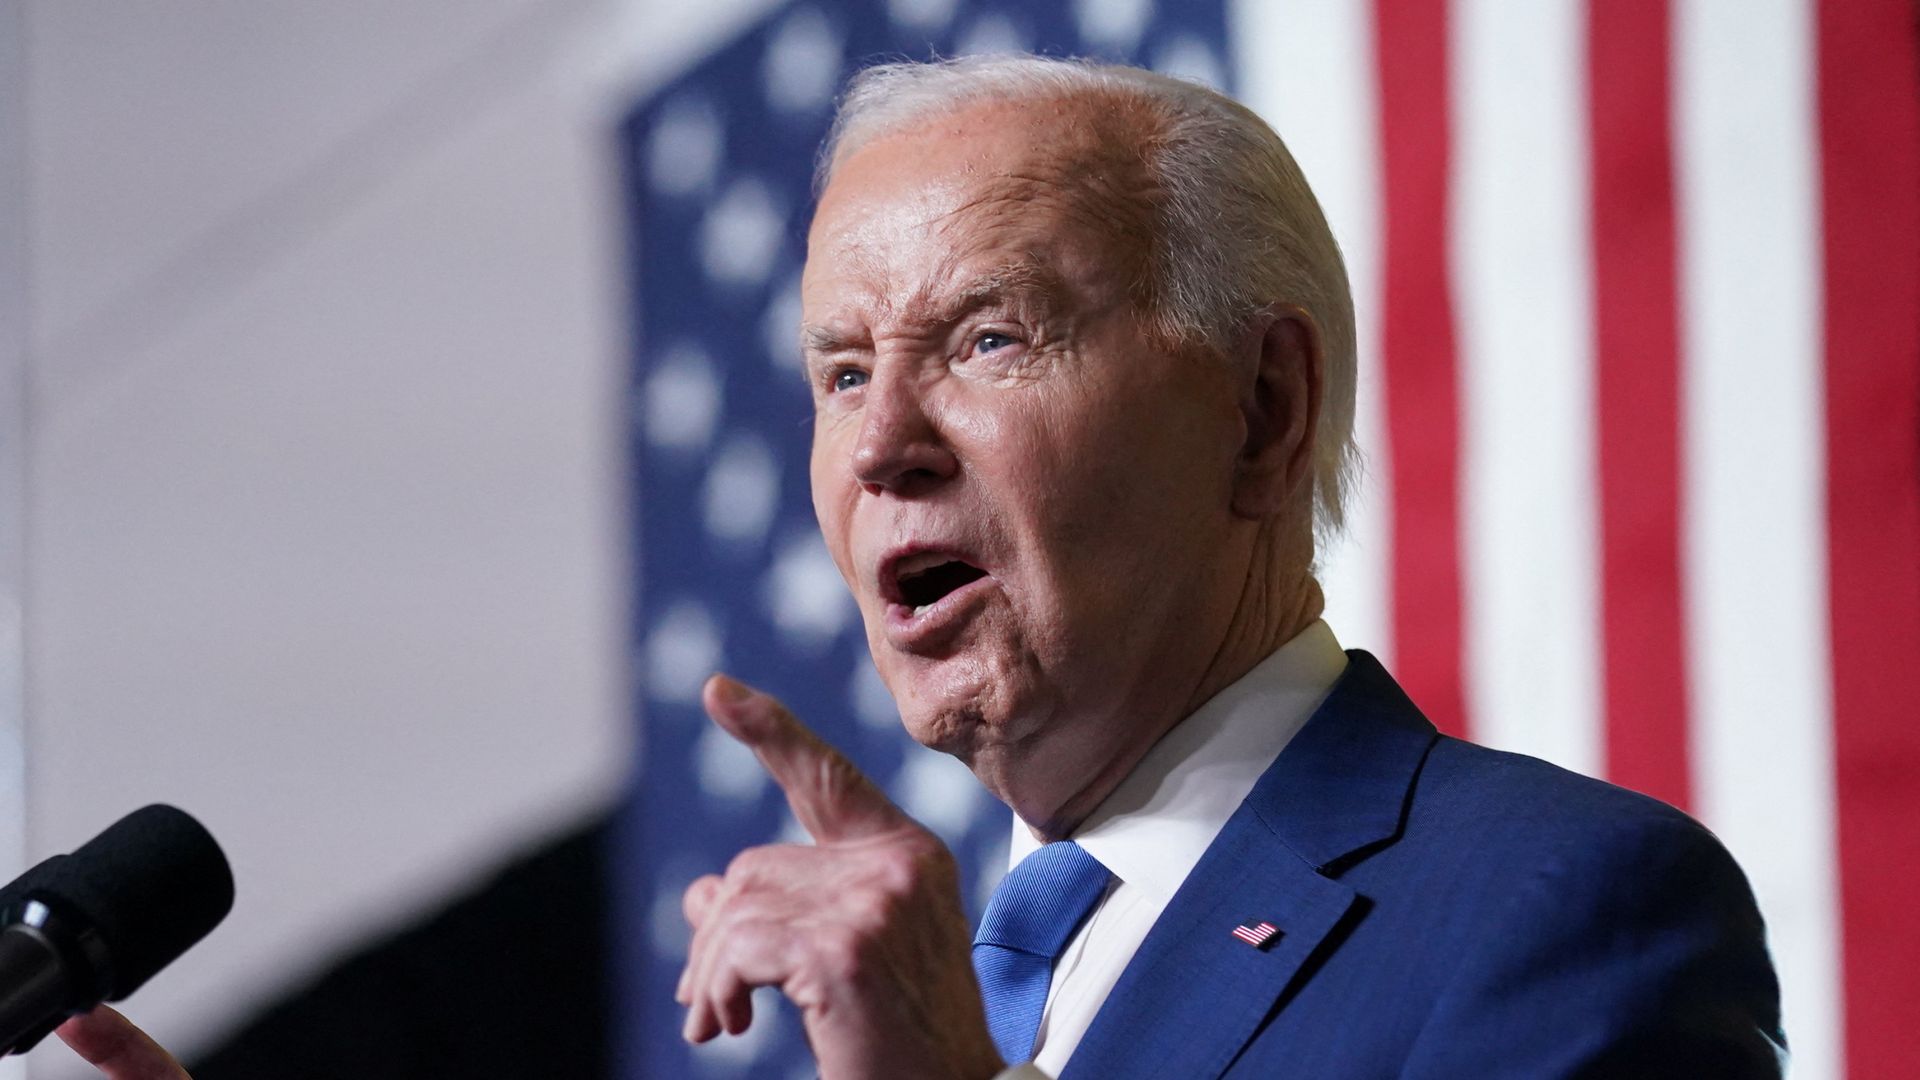 Biden says US will stop some weapons shipments to Israel if it invades Rafah